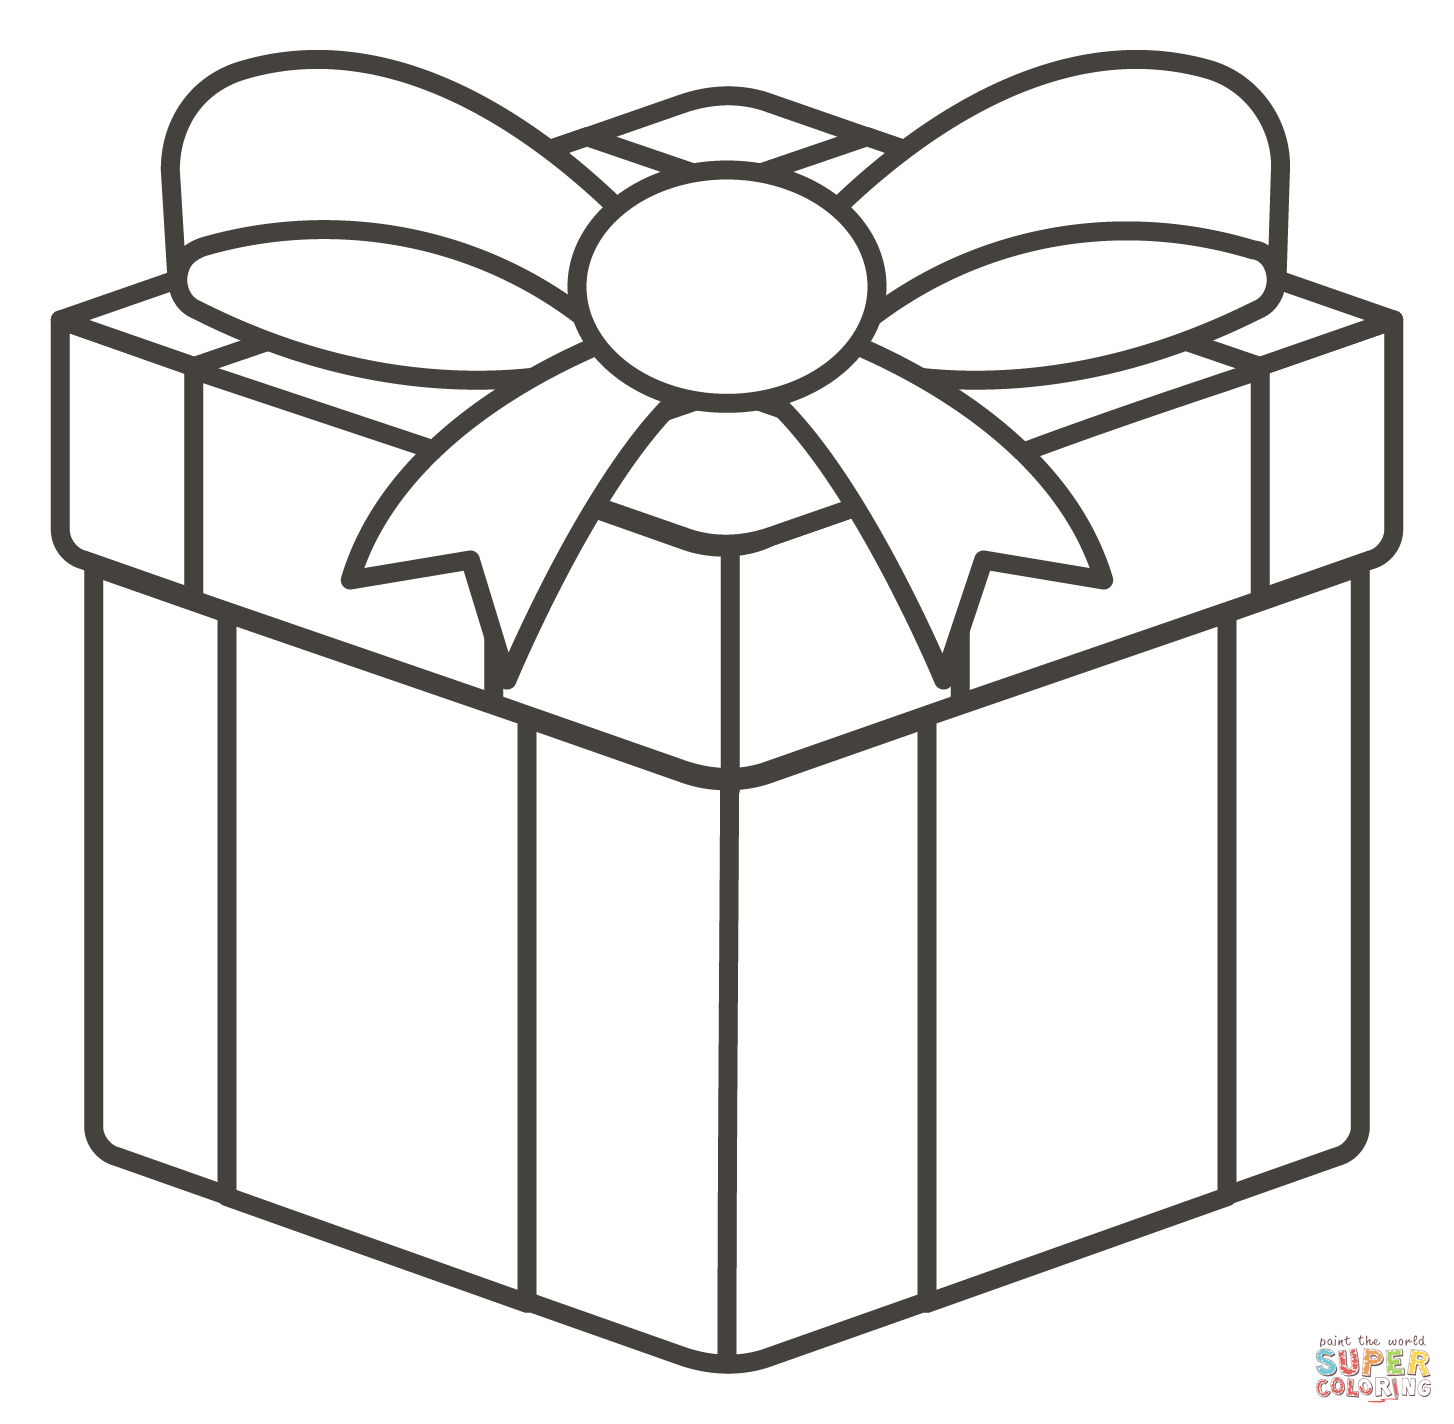 Wrapped gift coloring page free printable coloring pages